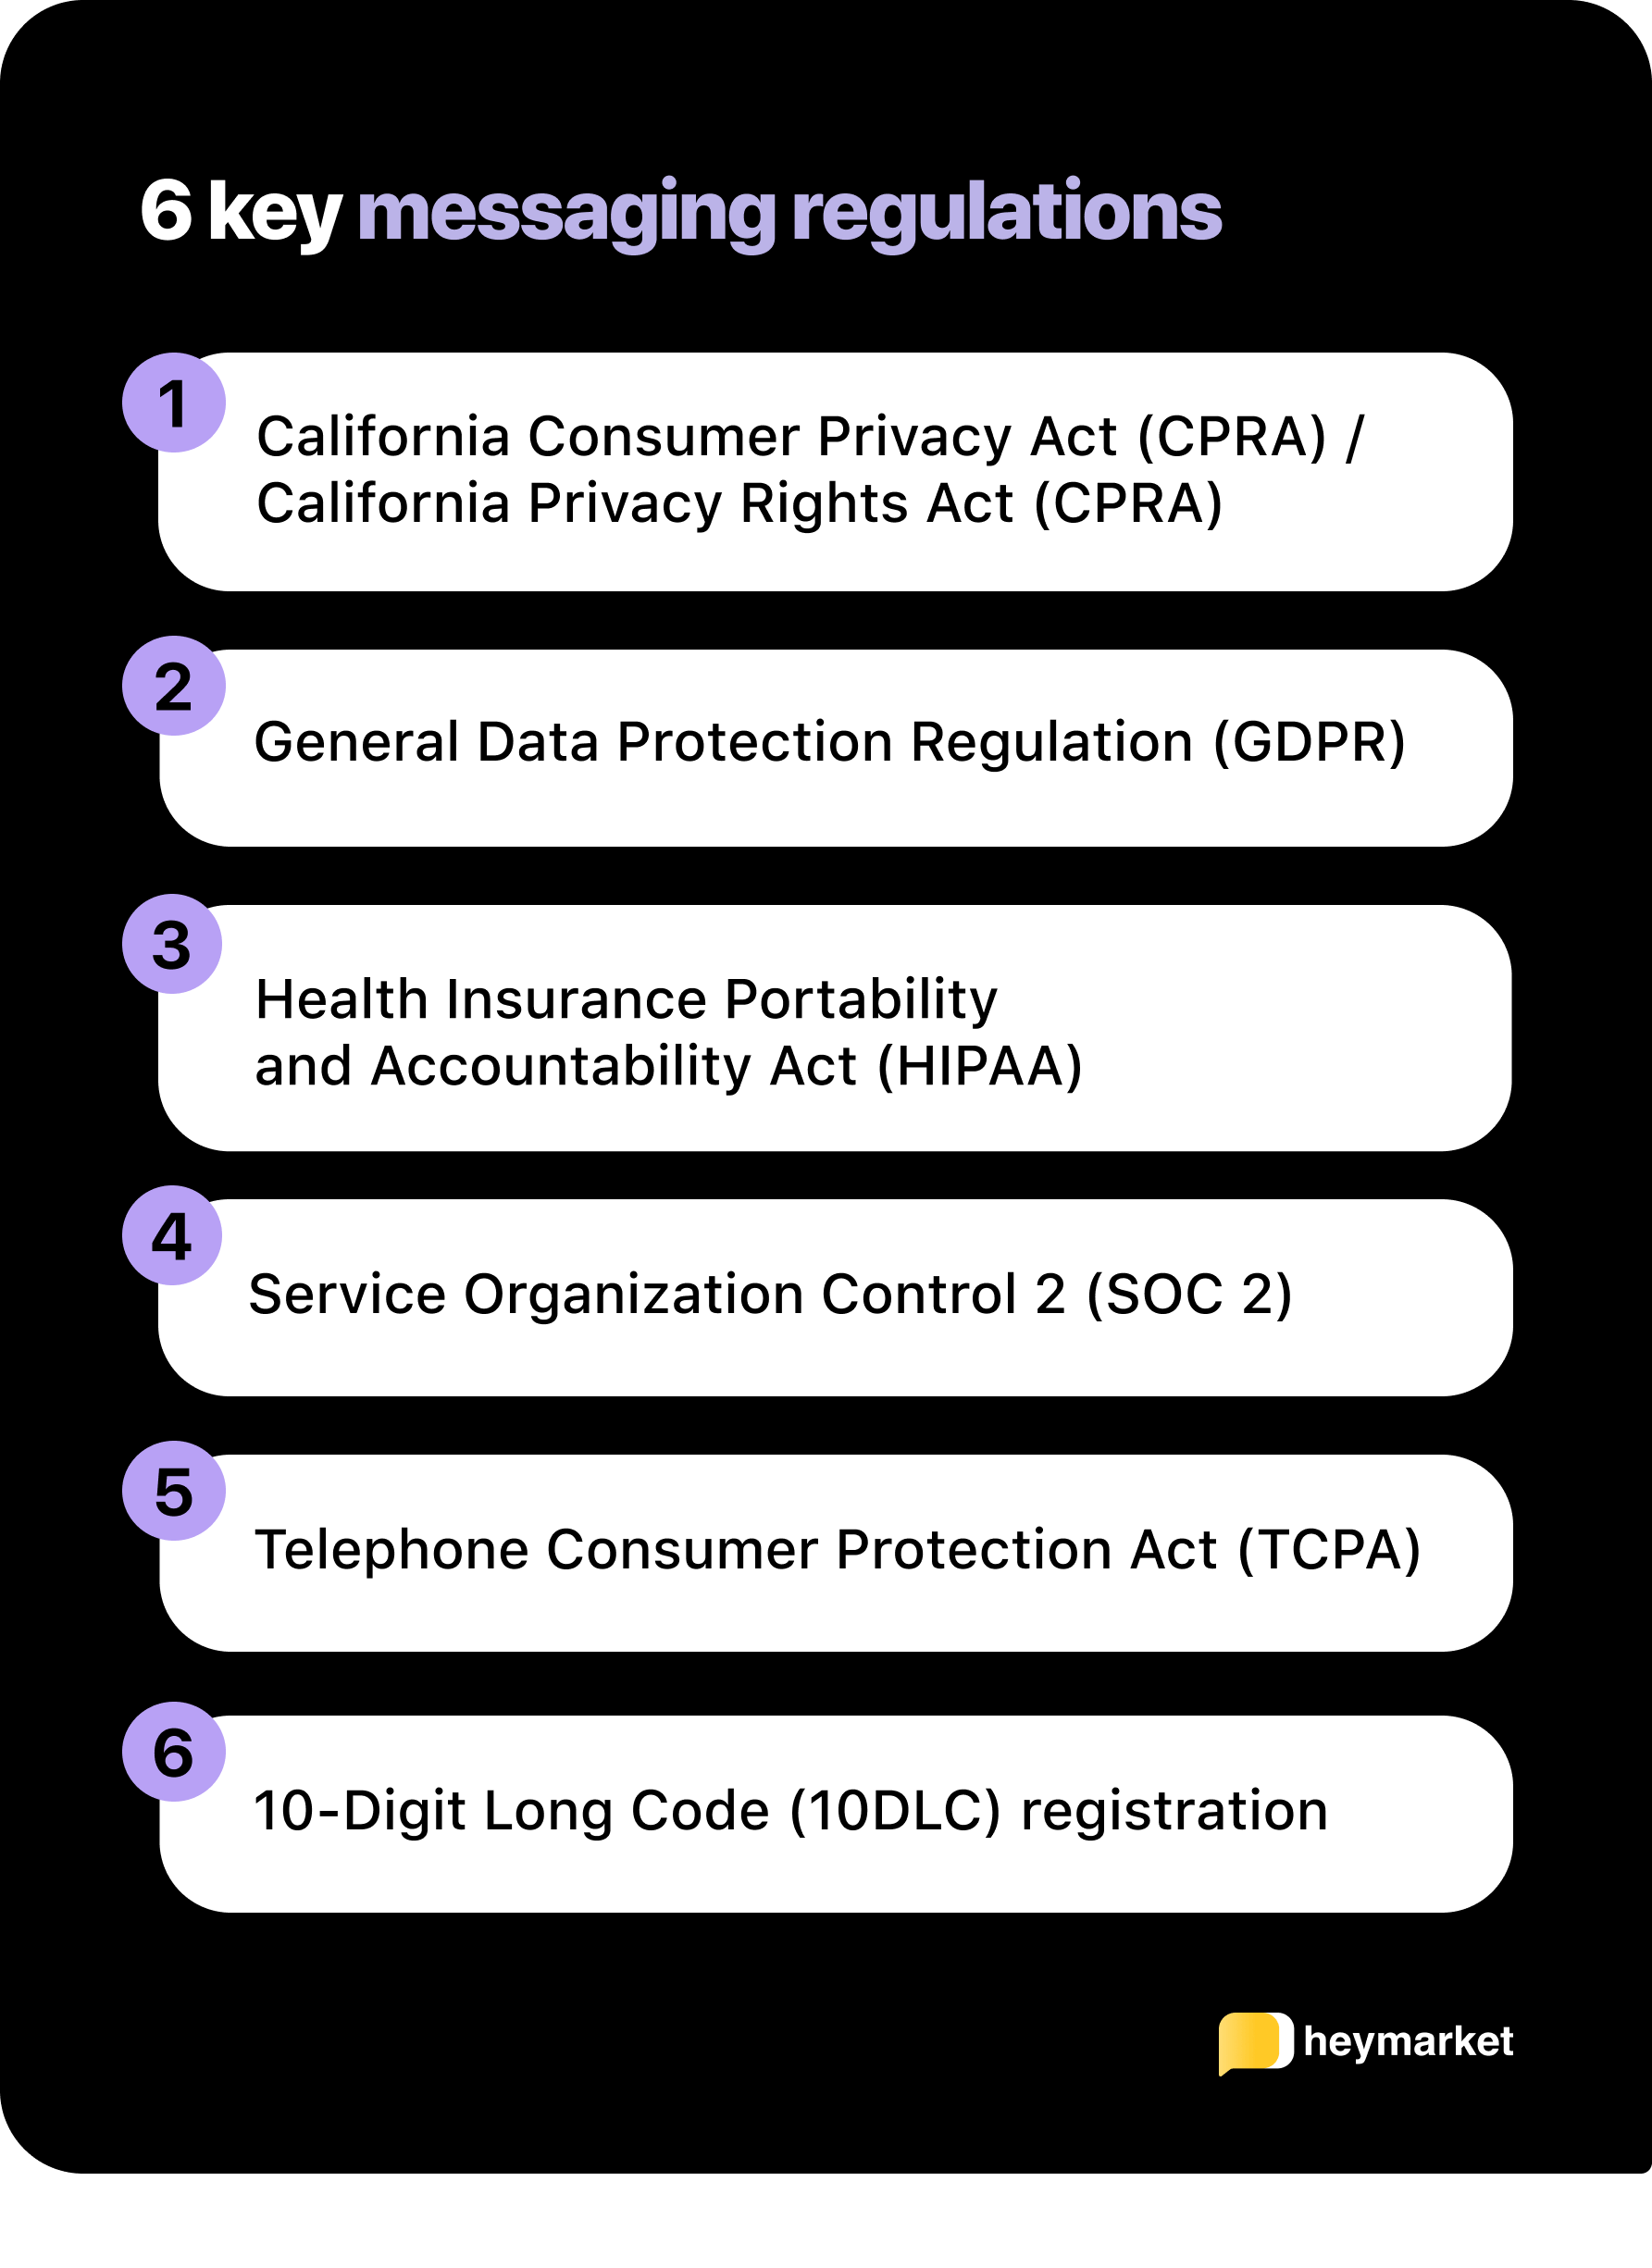 List of business texting regulations, including the Telephone Consumer Protection Act (TCPA) and General Data Protection Regulation (GDPR)